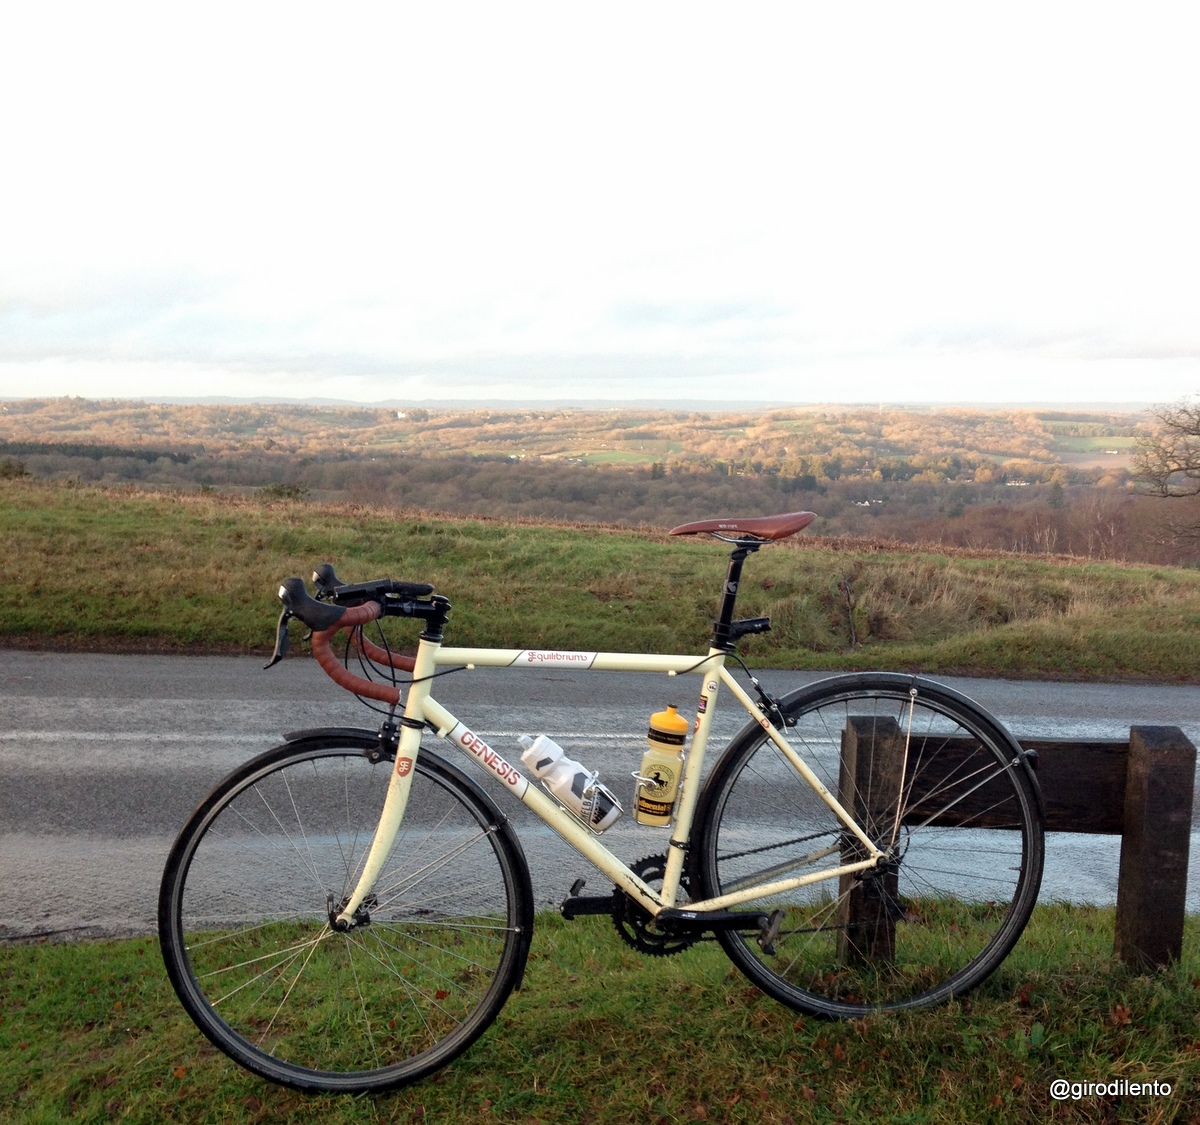 Genesis Equilibrium 20 on the Ashdown Forest